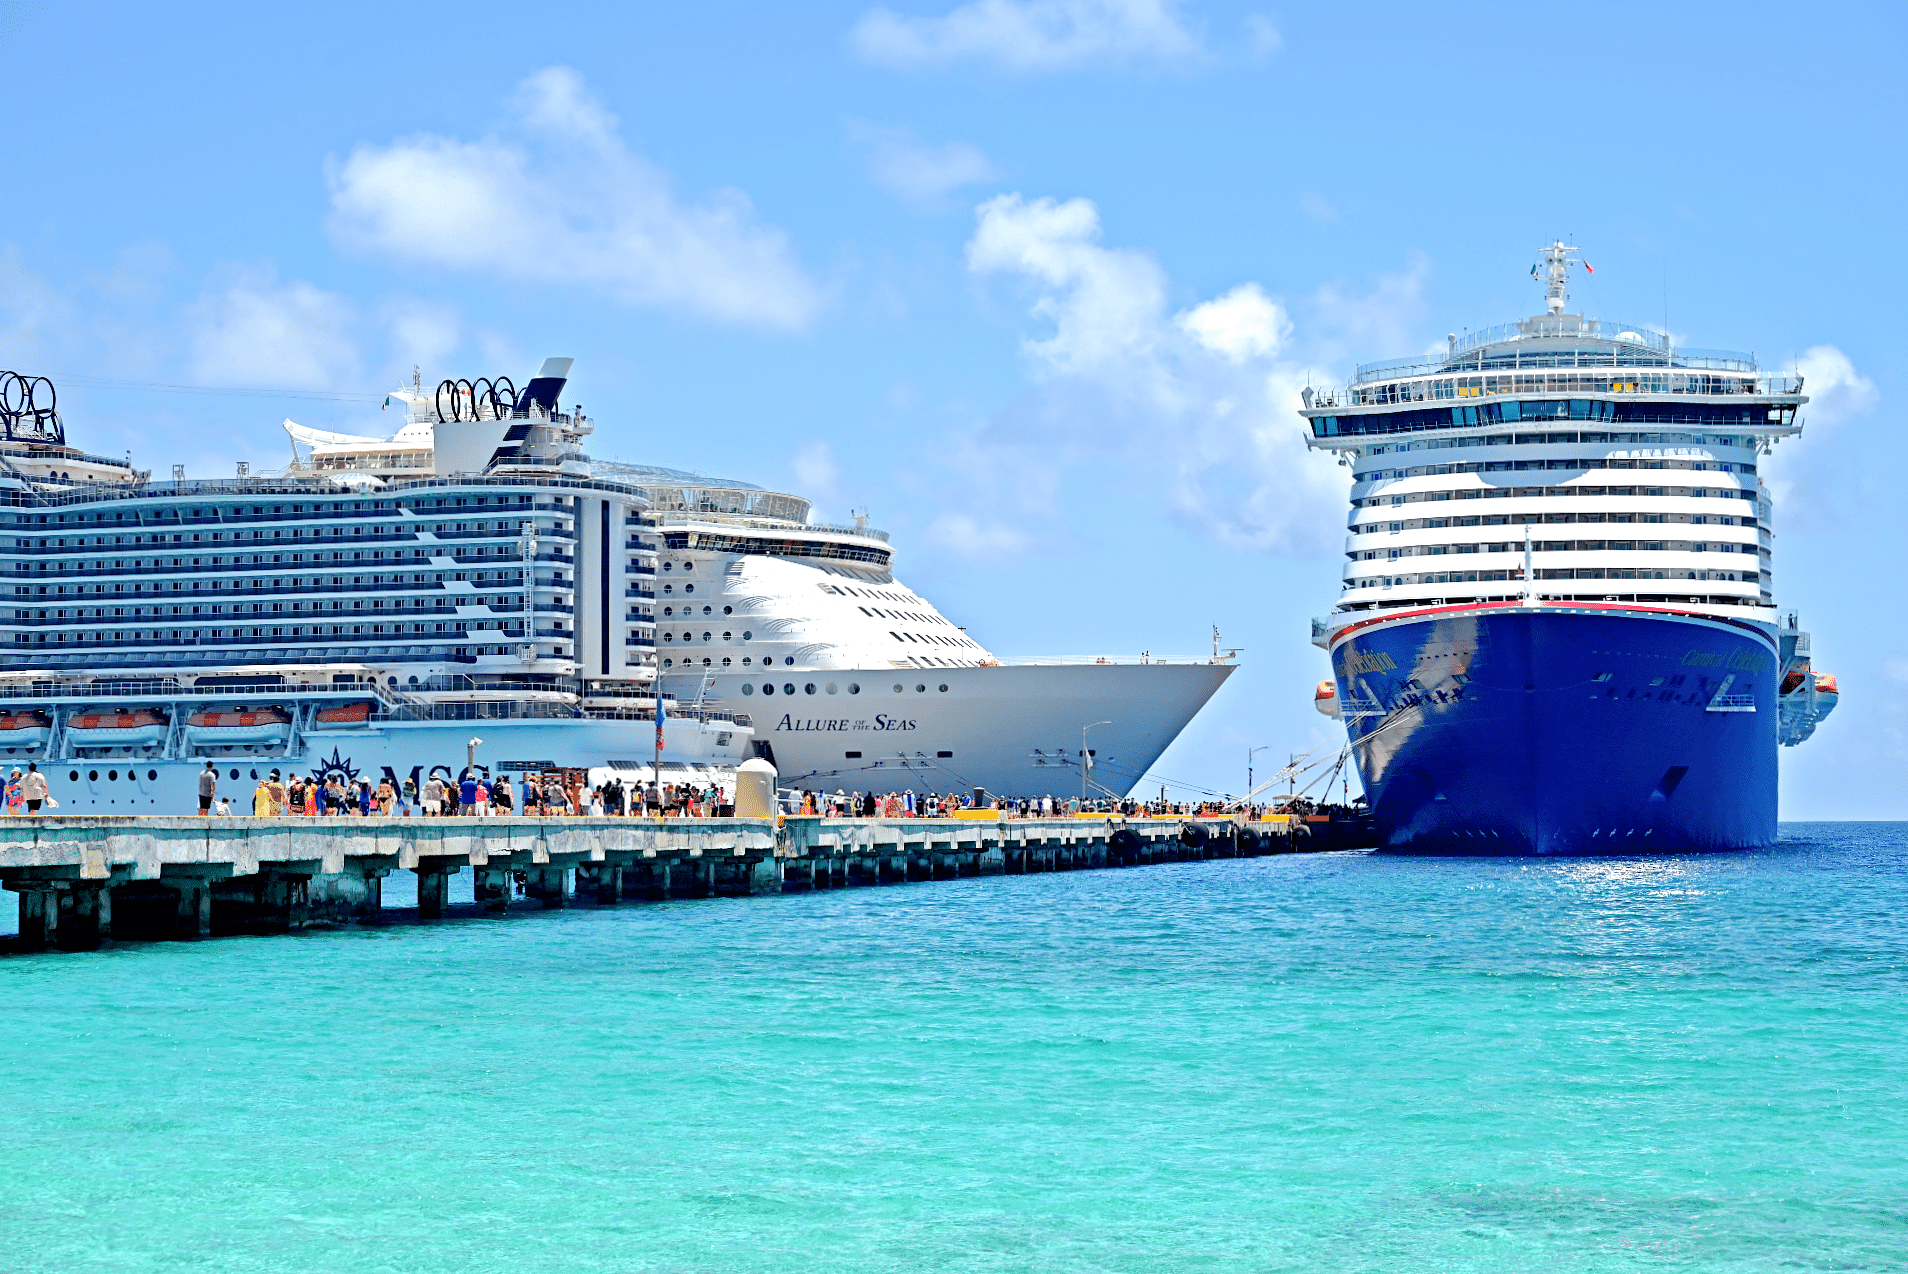 Costa Maya cruise port with Celebration, Seaside and Allure of the Seas